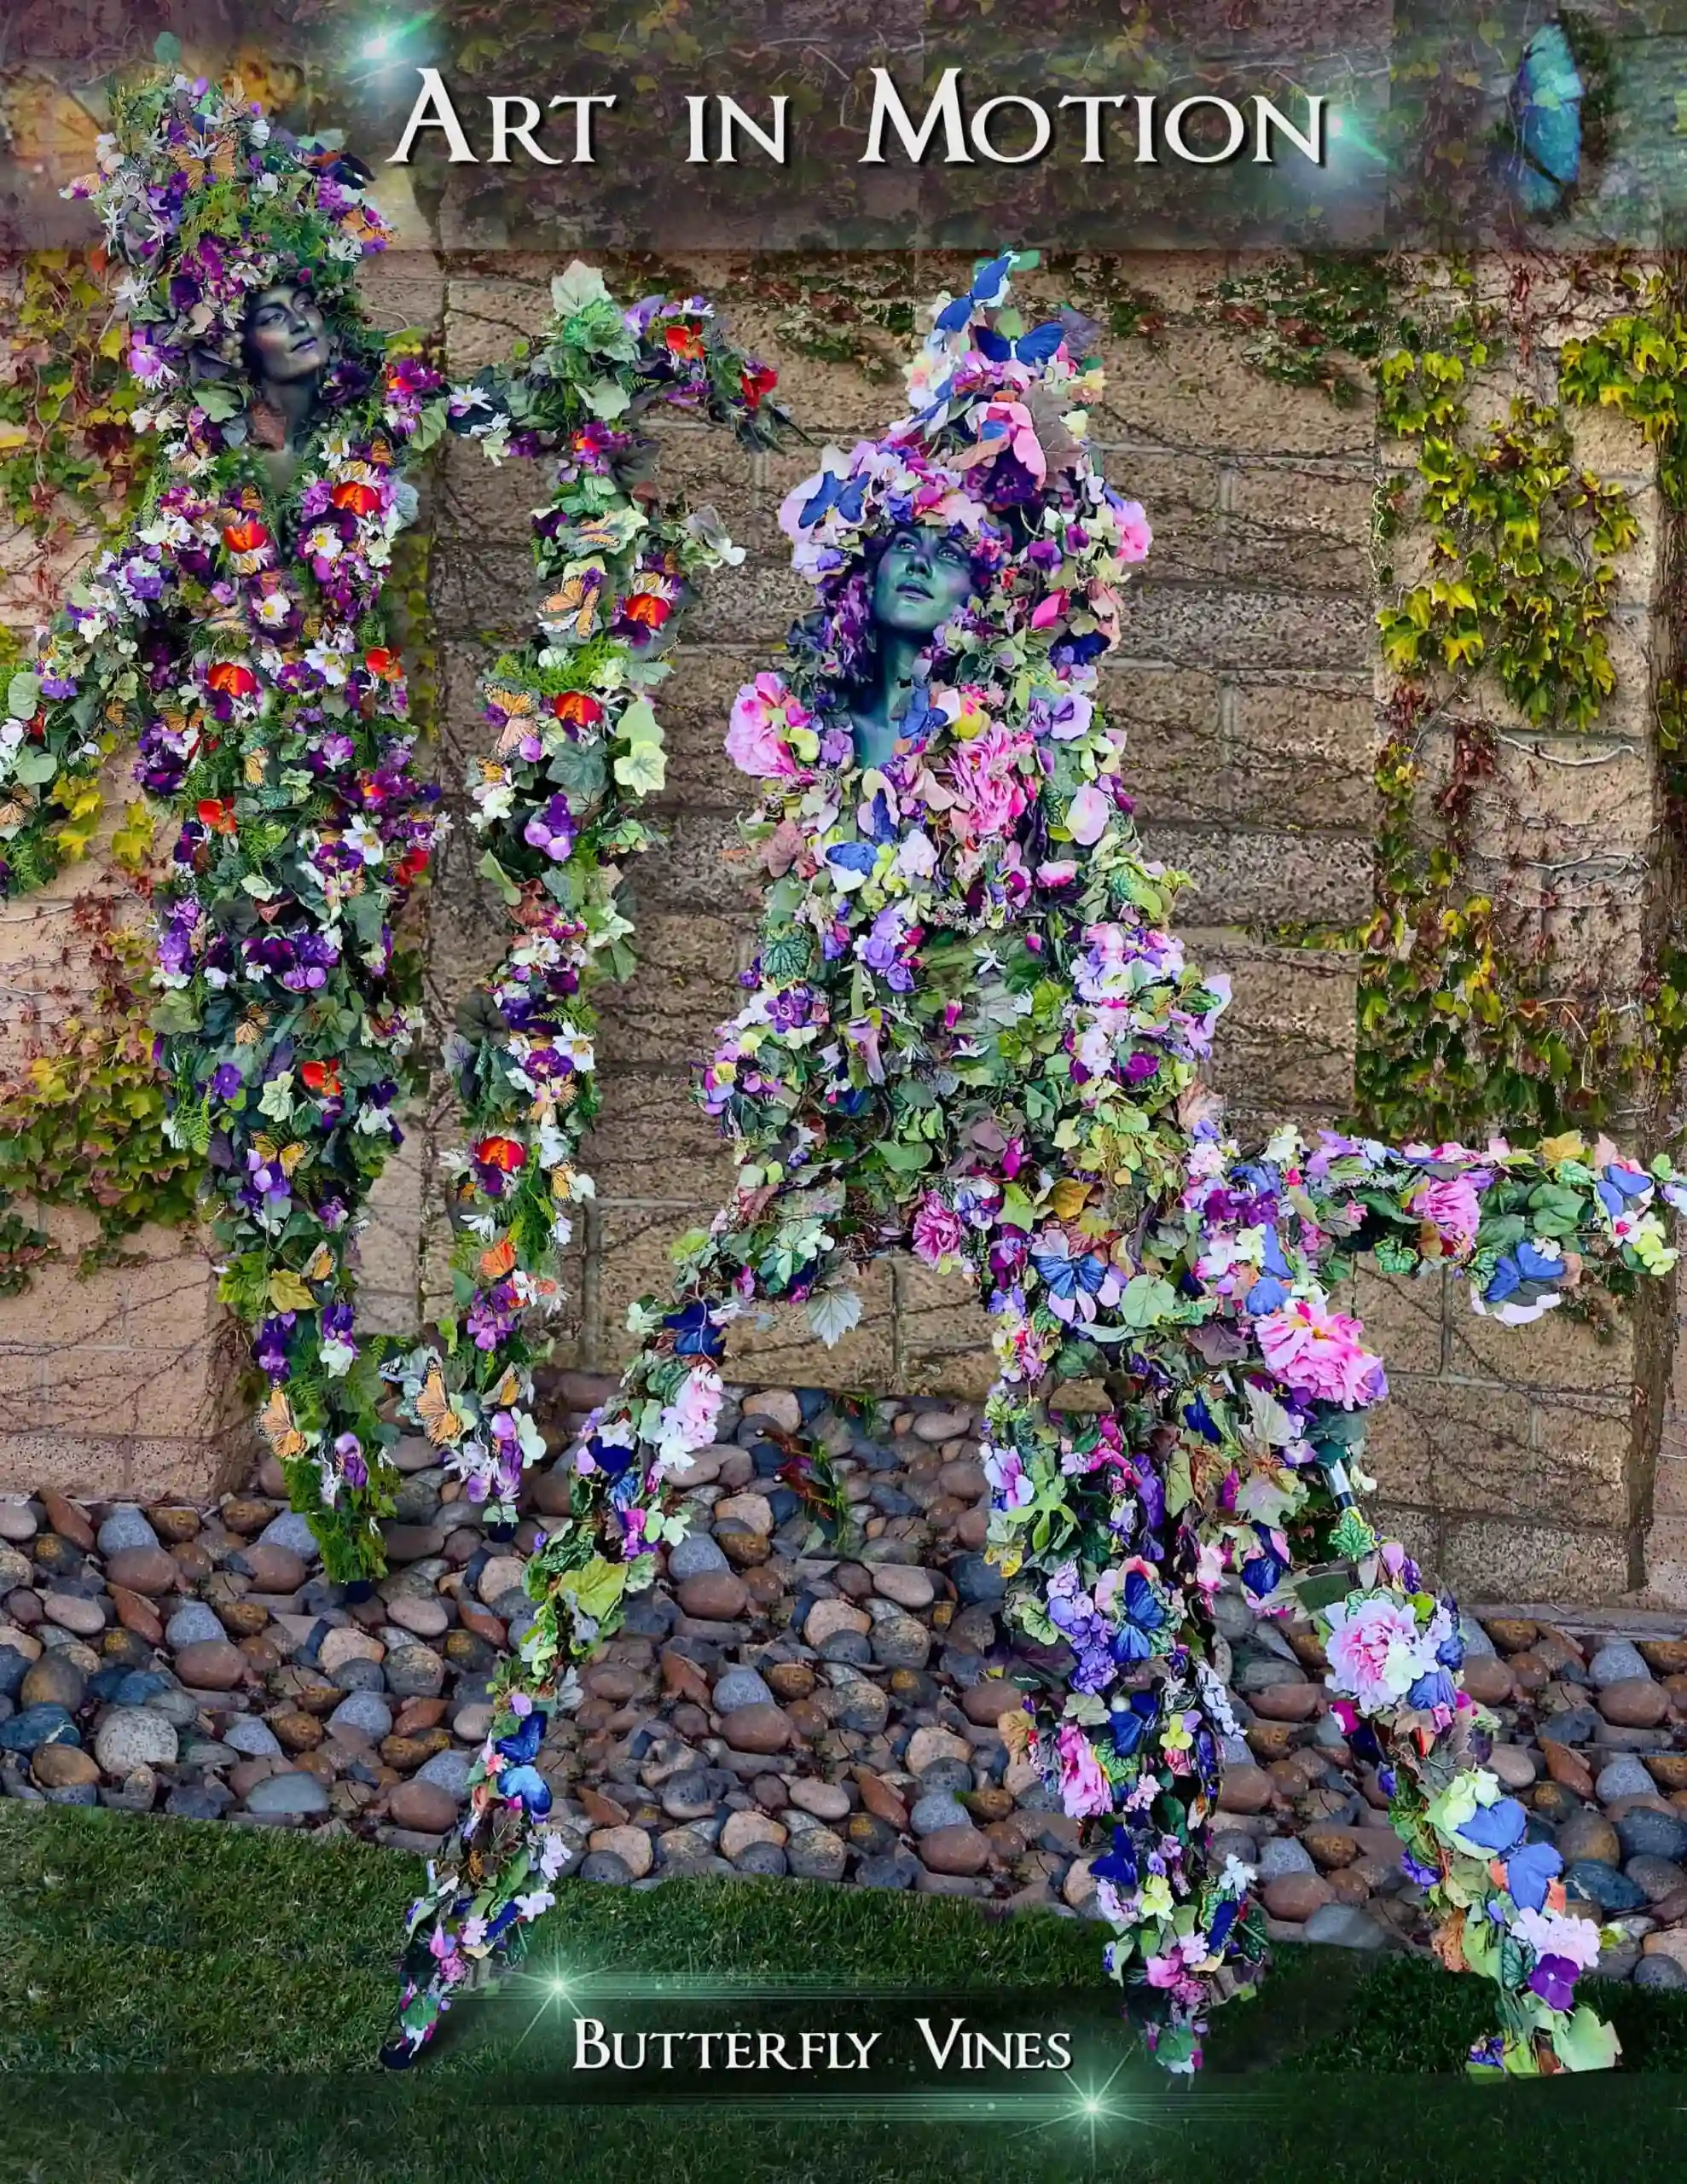 Butterfly Vines art illusion by a human